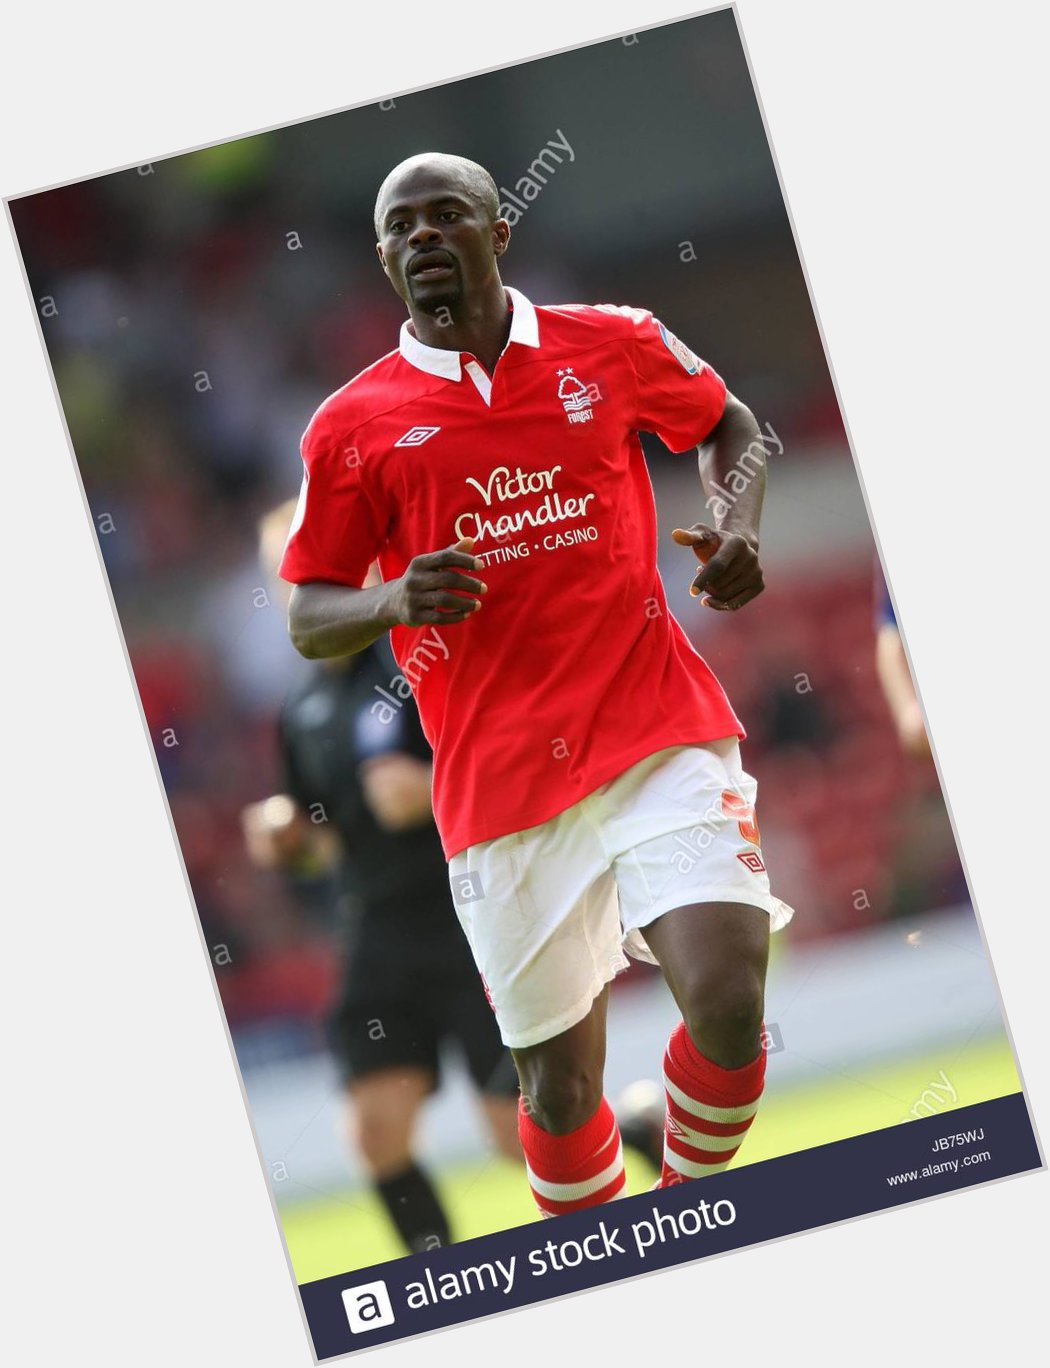 Happy birthday to former reds player George boateng 